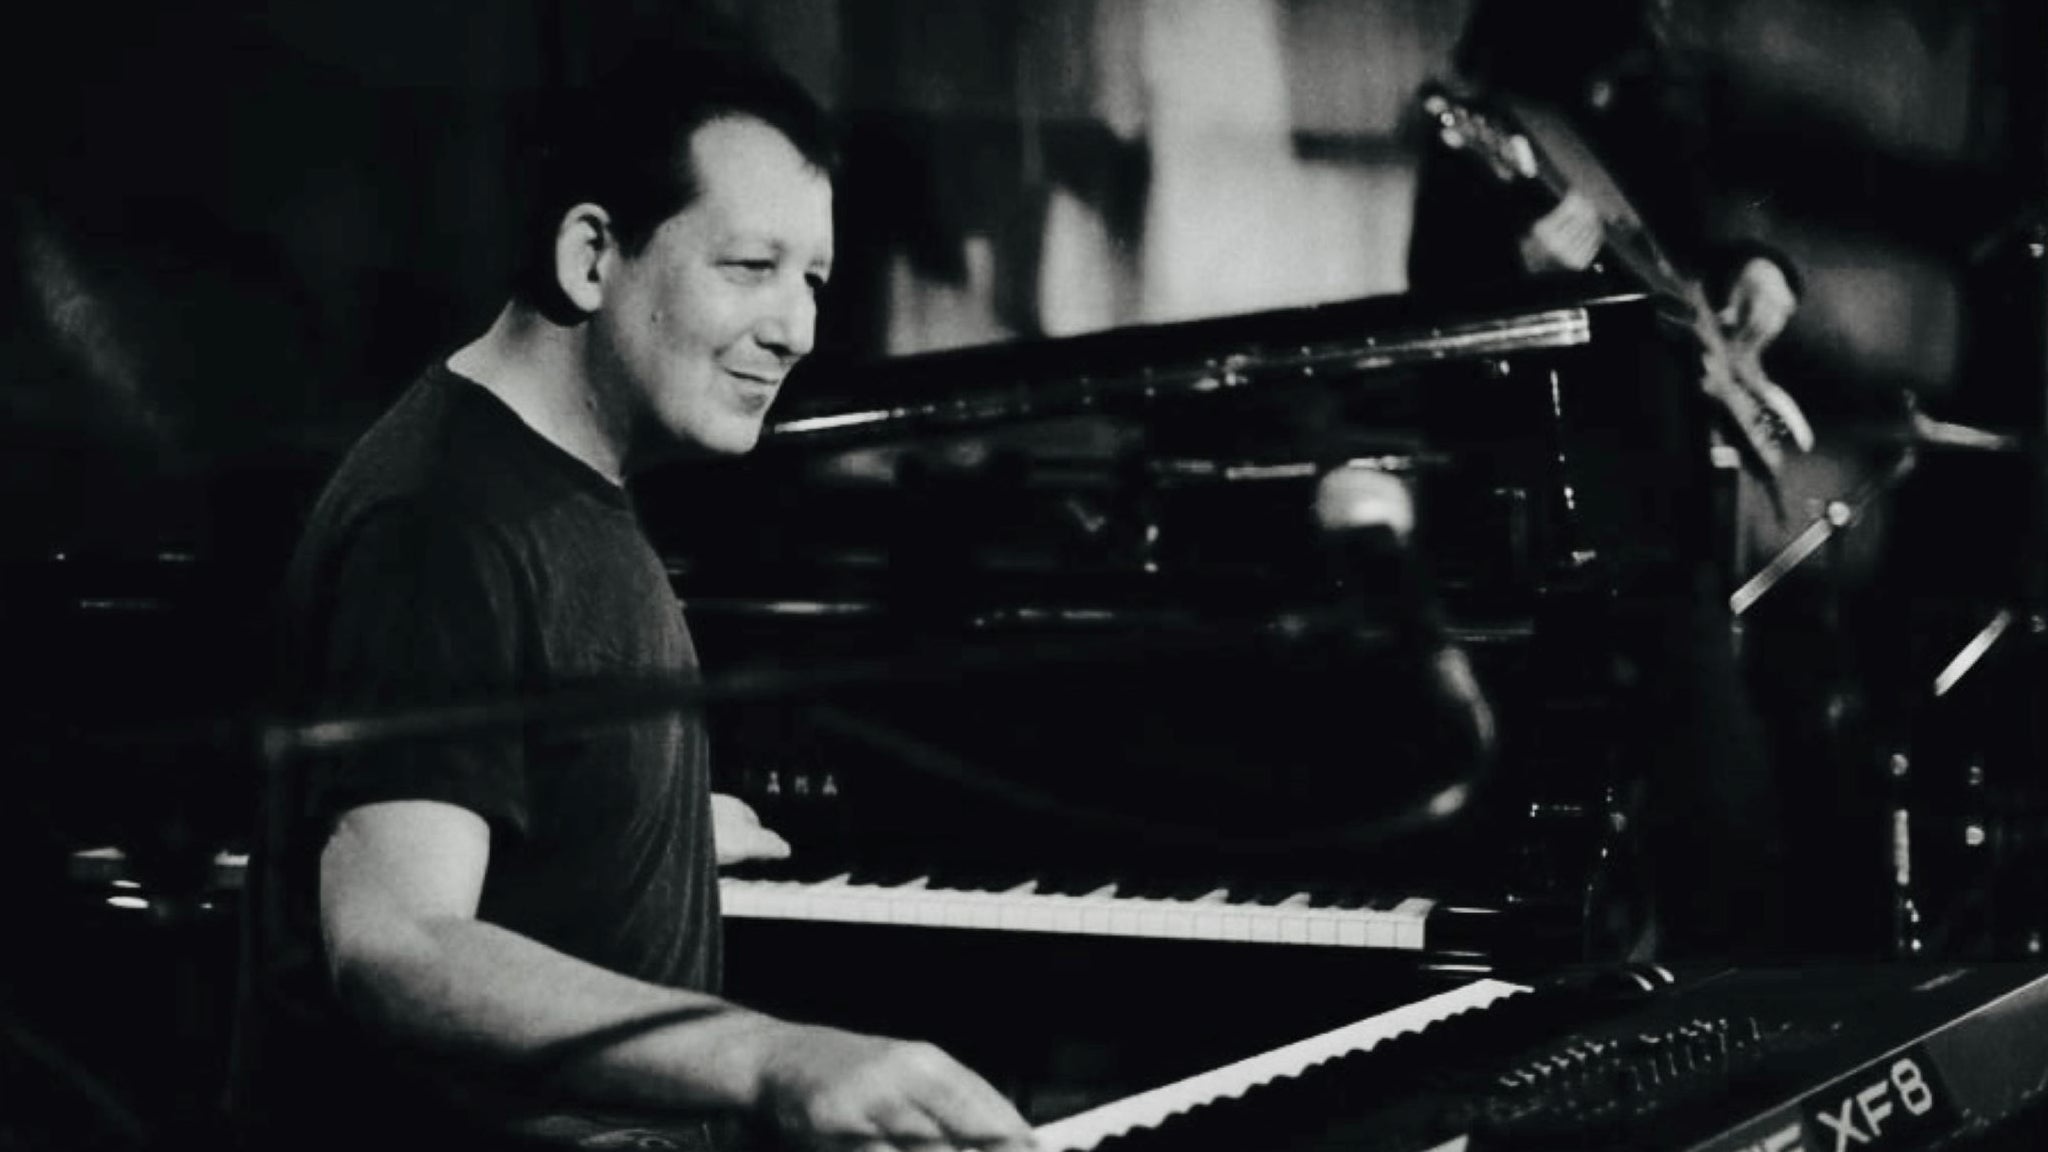 Jeff Lorber Fusion (Jimmy Haslip, Sonny Emory) in Portsmouth promo photo for Inner Circle presale offer code